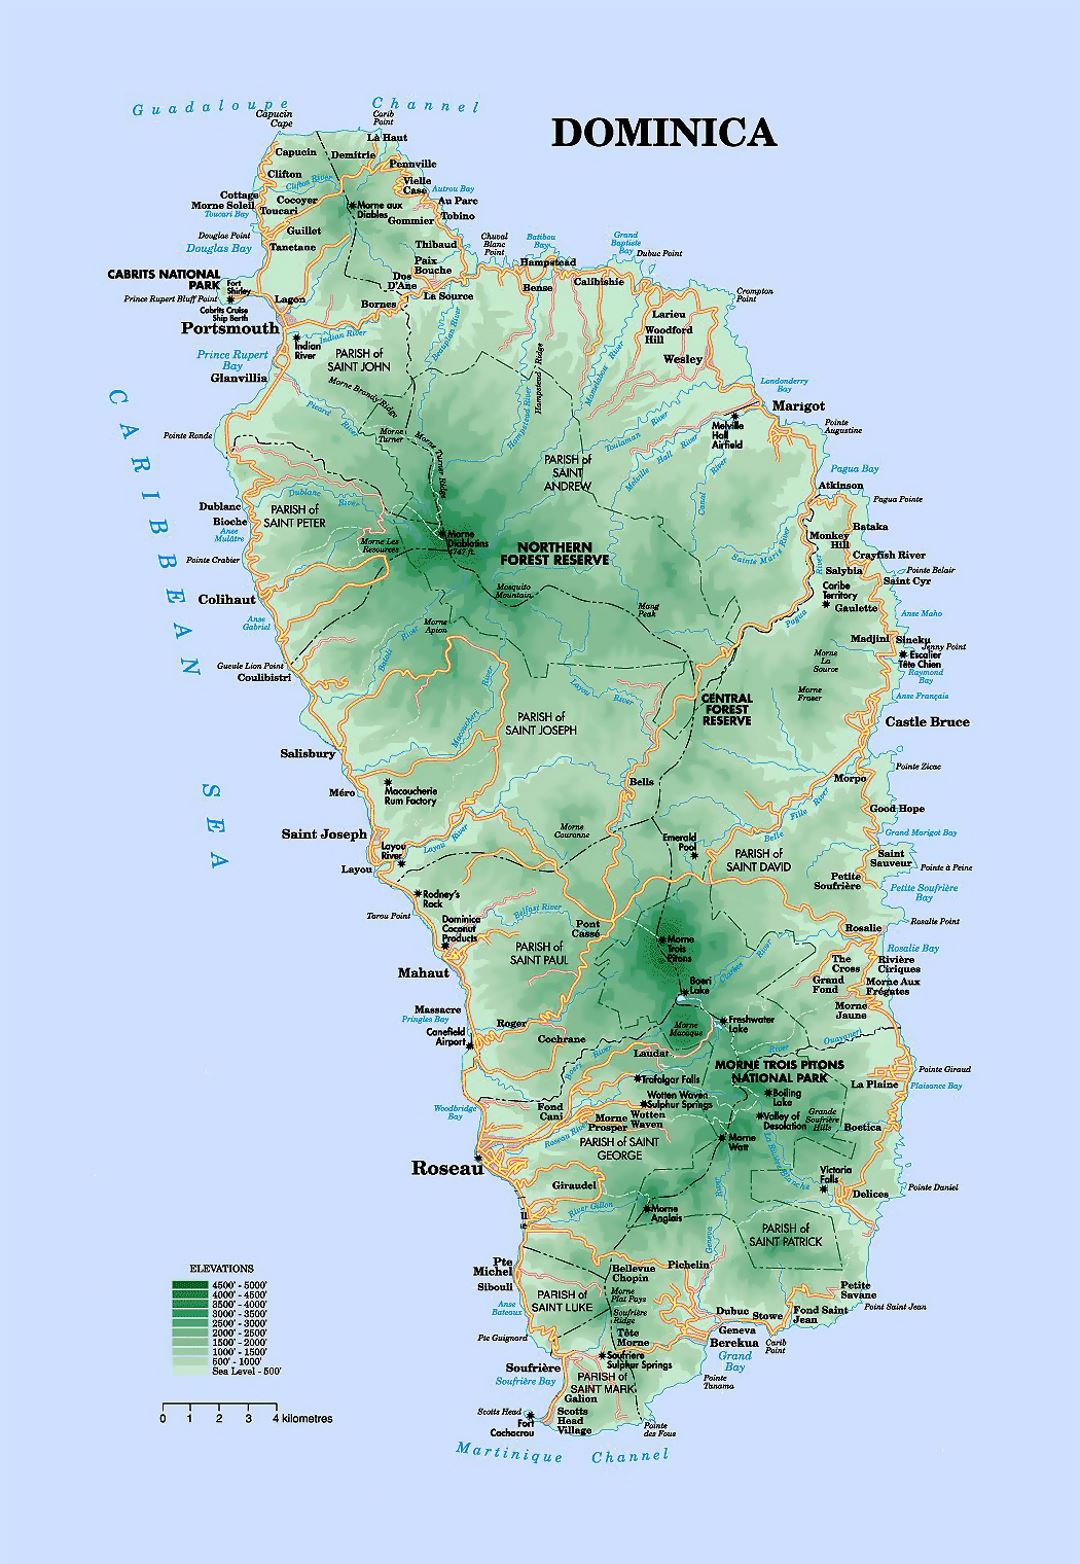 Detailed elevation map of Dominica with roads and cities